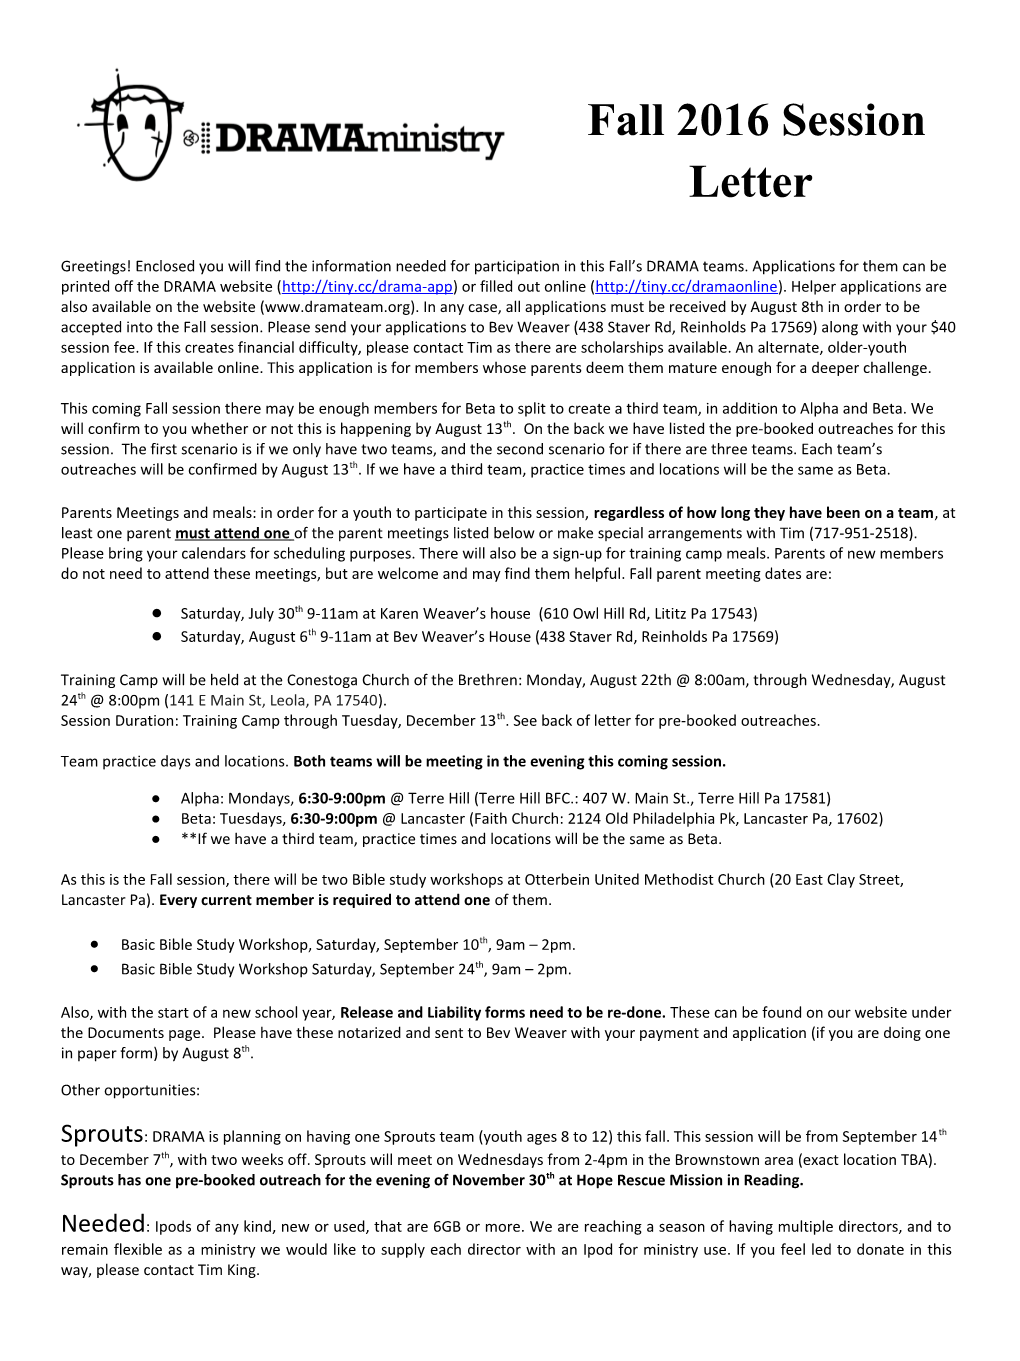 Fall 2016 Session Letter